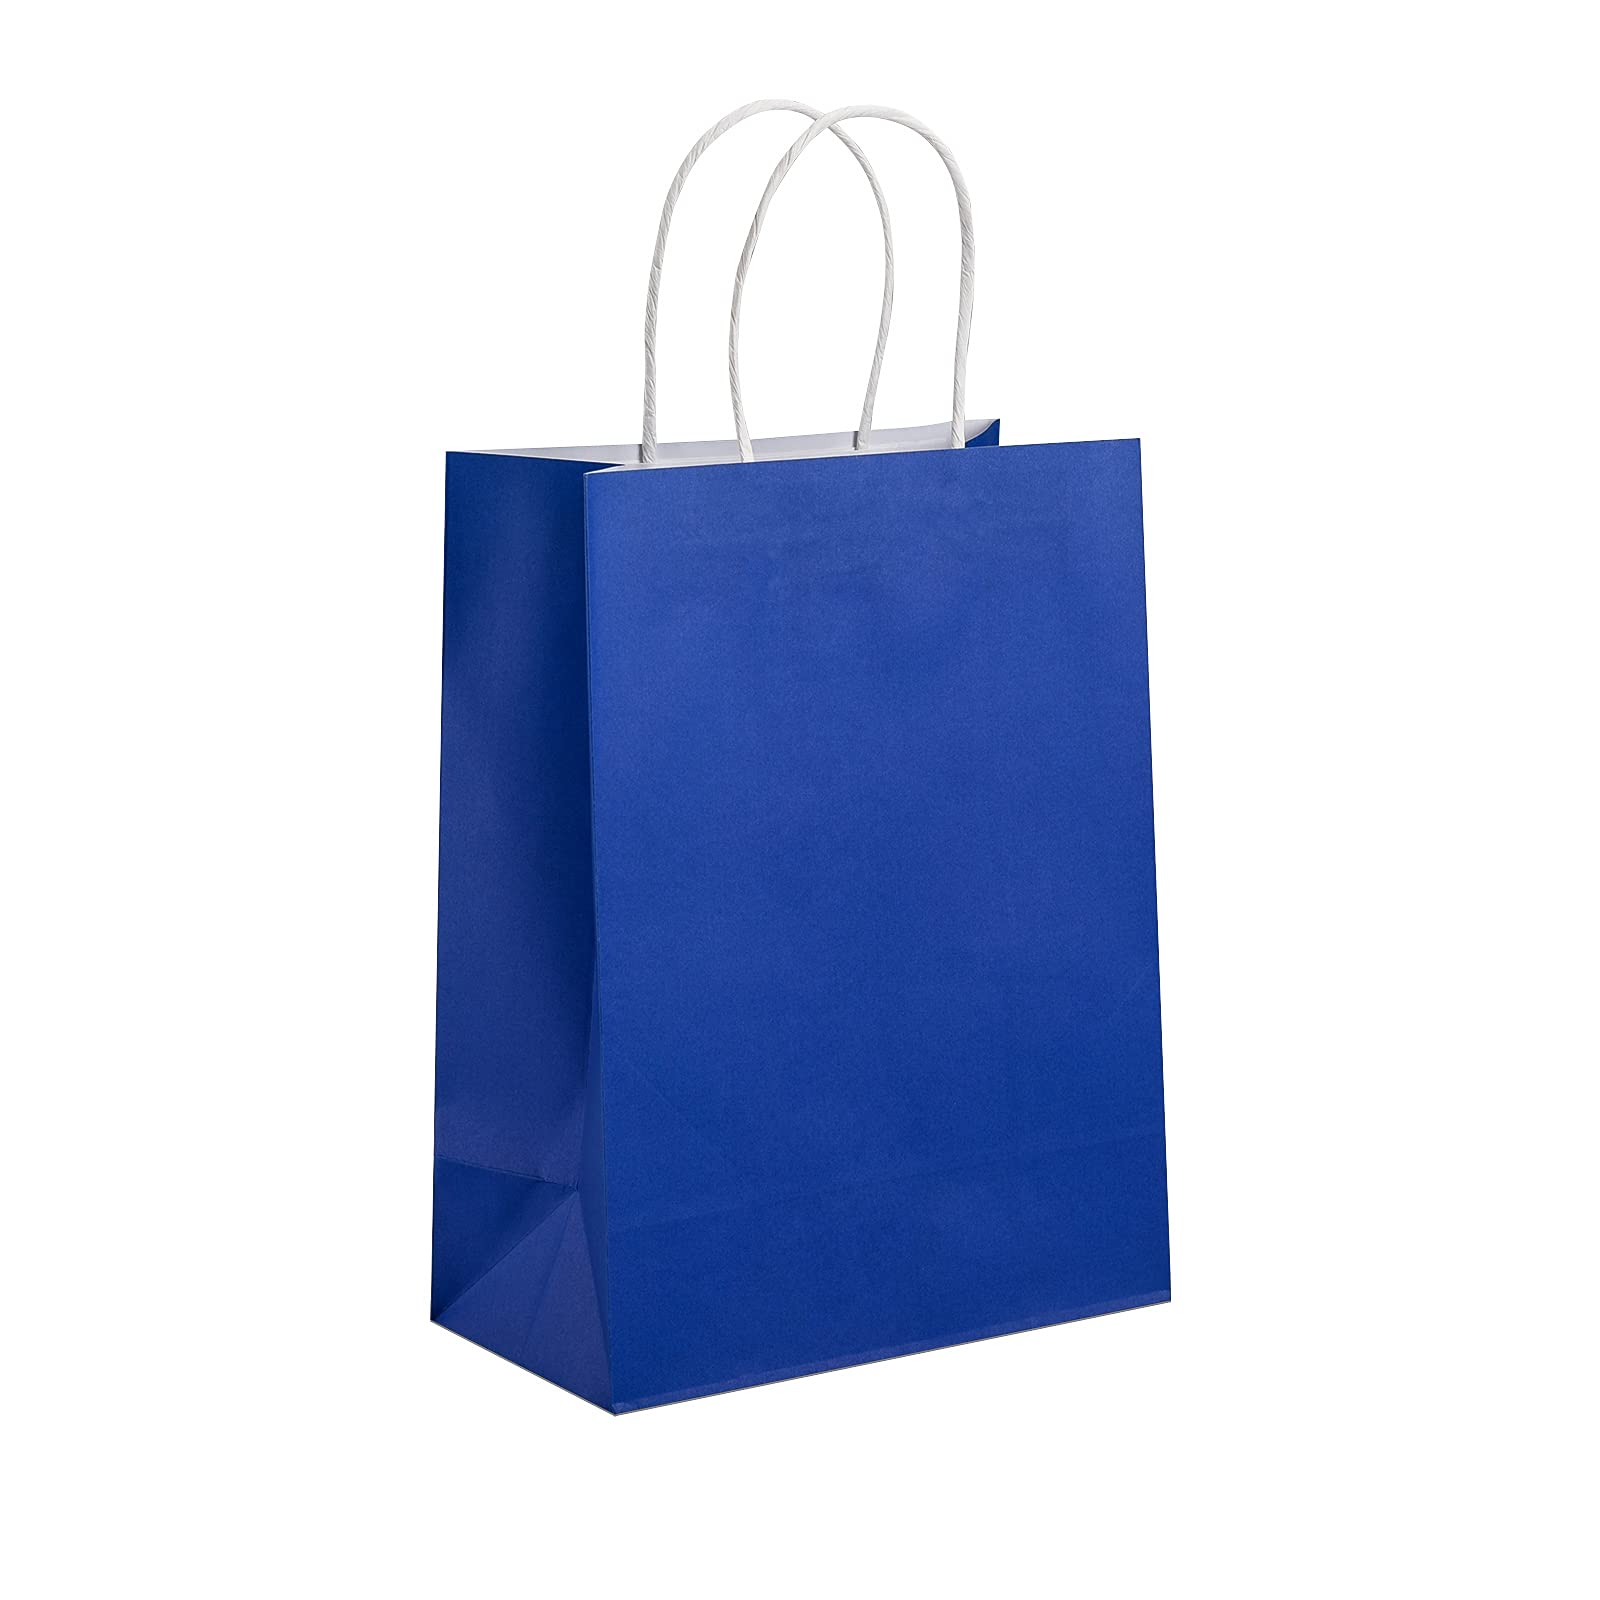 Kolaxen Royal Blue Kraft Paper Gift Bags with Tissue Paper 24 Pcs 10.6 * 7.9 * 4.3 inches, Medium Gift Bags with Handles for Bir